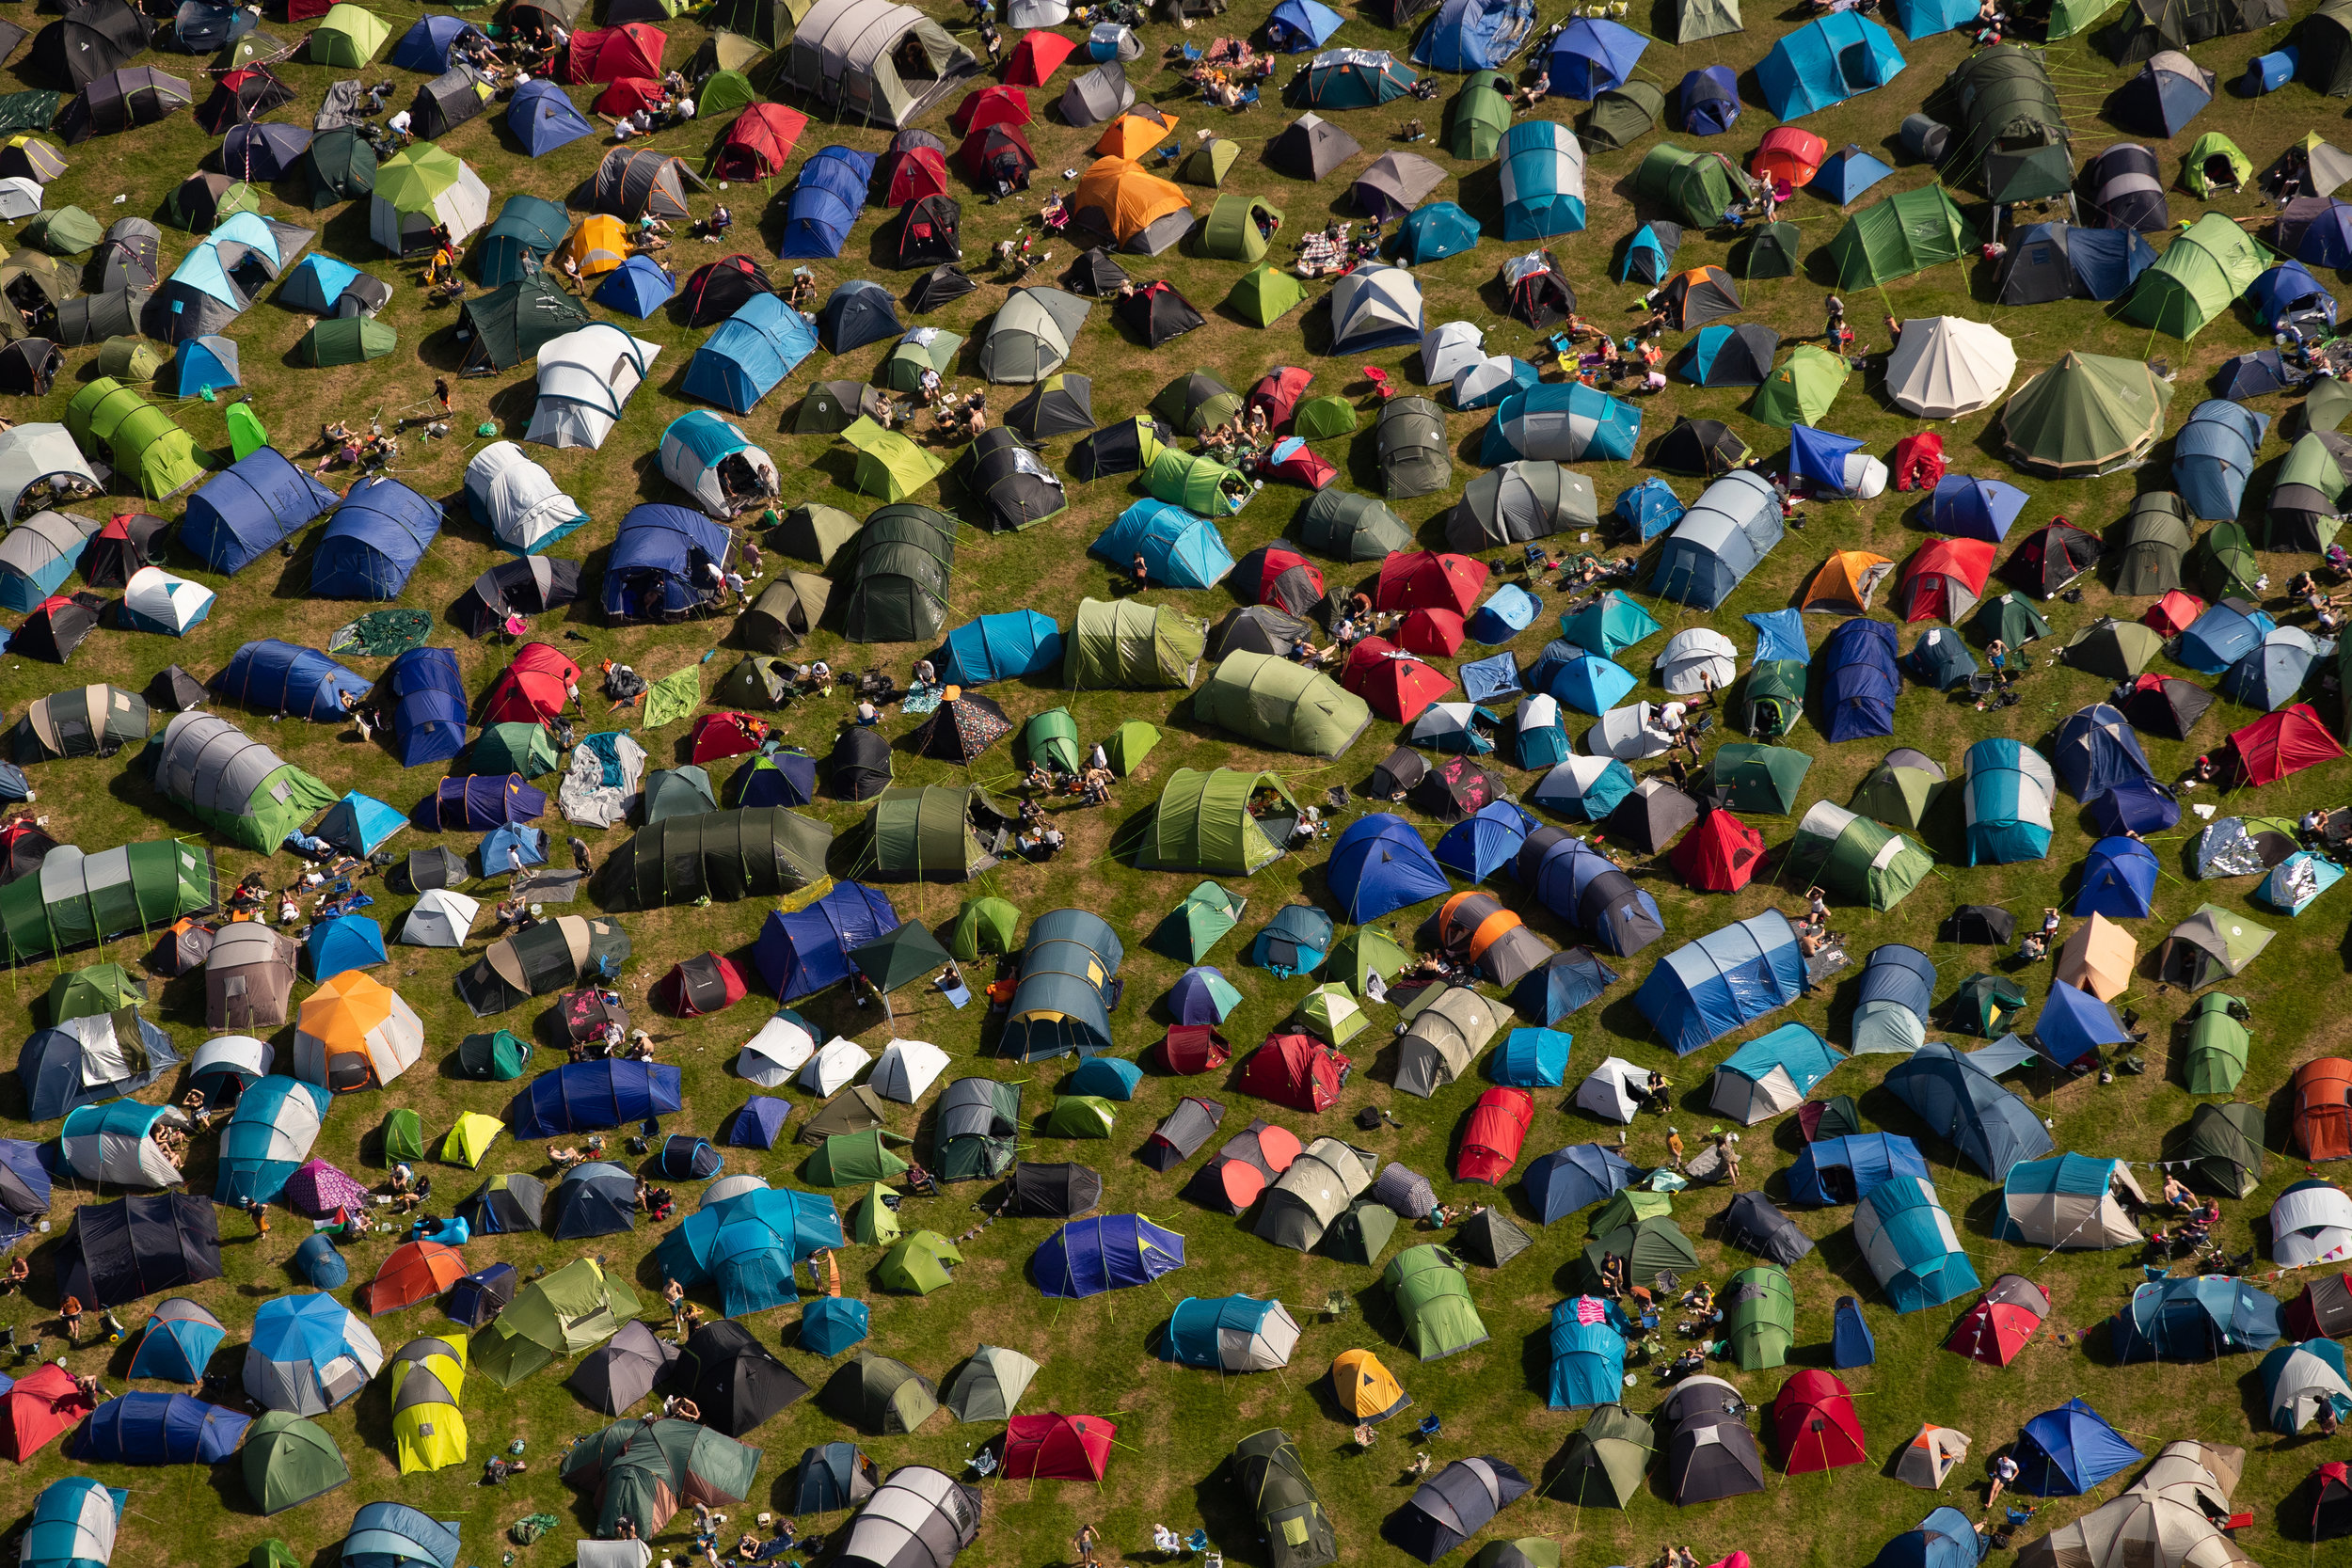  An aerial view of tents at the camping site for Glastonbury Festival at Worthy Farm in Somerset, England. The five day performing arts and music event Glastonbury Festival has officially opened, transforming the Somerset farm into a city for many th